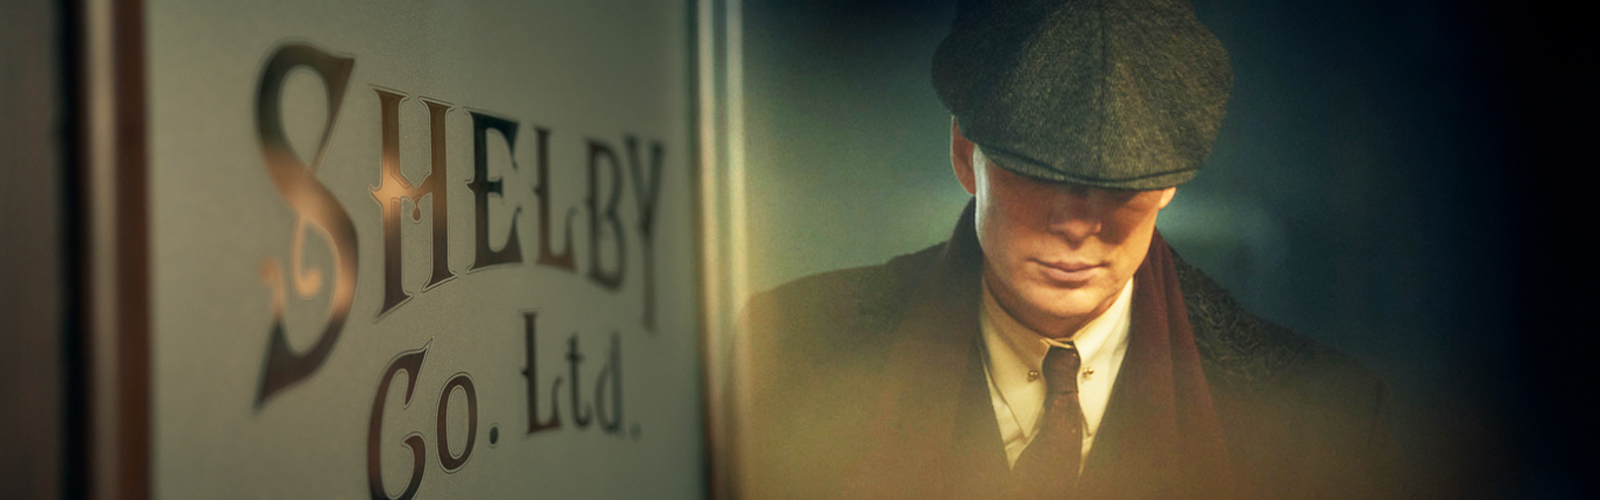 Newly Appointed Oscar Winner Cillian Murphy Is ‘Definitely’ Onboard For The ‘Peaky Blinders’ Movie